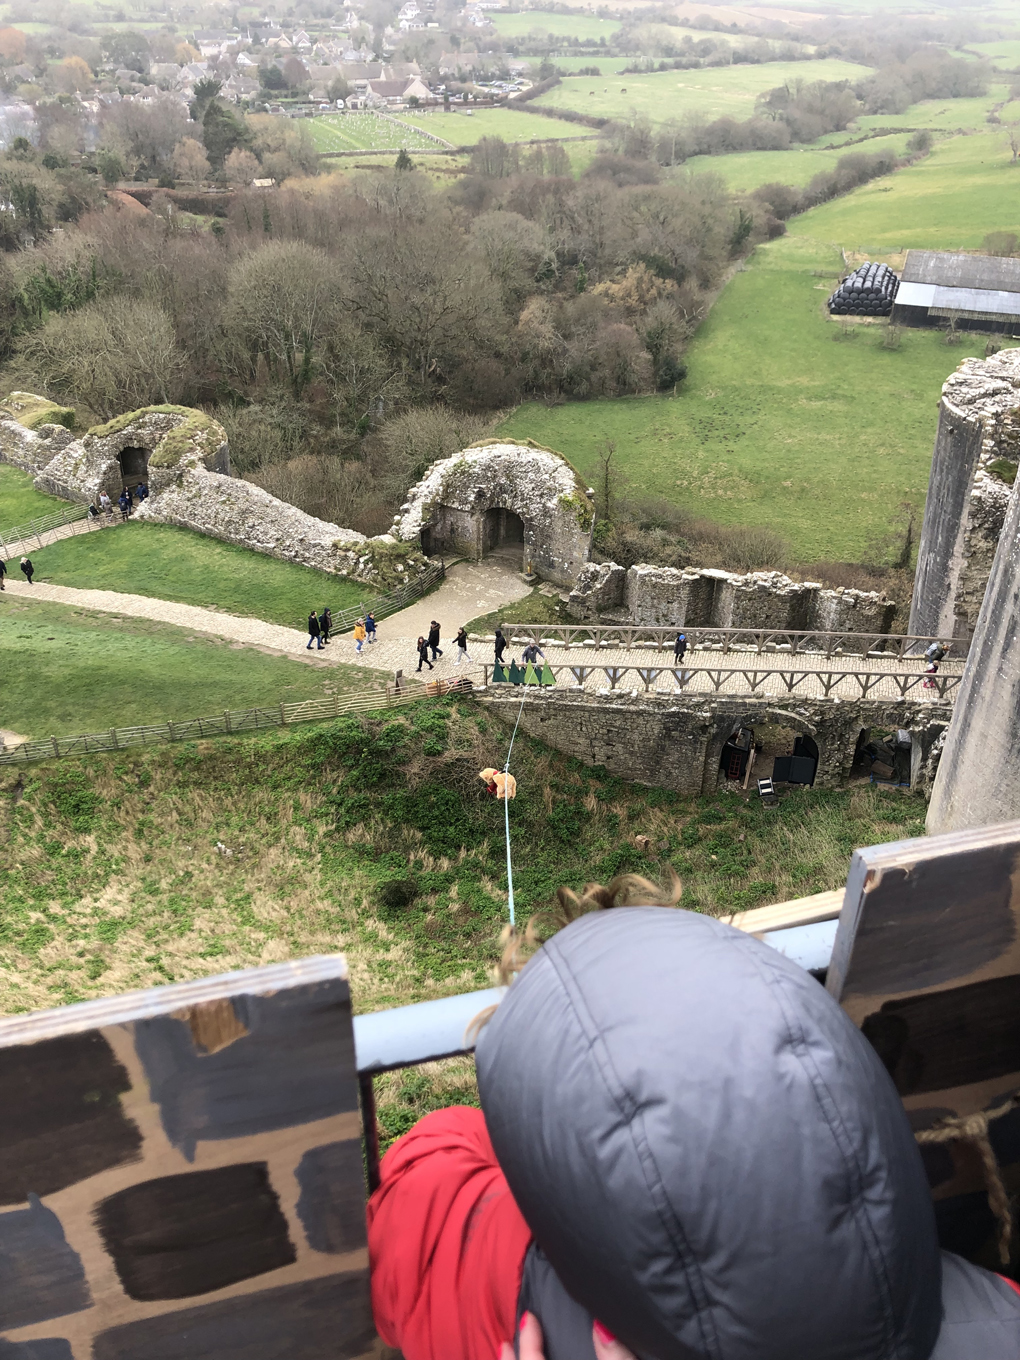 A toy bear sliding down a makeshift zip-line with the ruins of a medieval castle, with a small boy in the foreground watching the descent after having released his bear, and the surrounding fields stretching into the background.